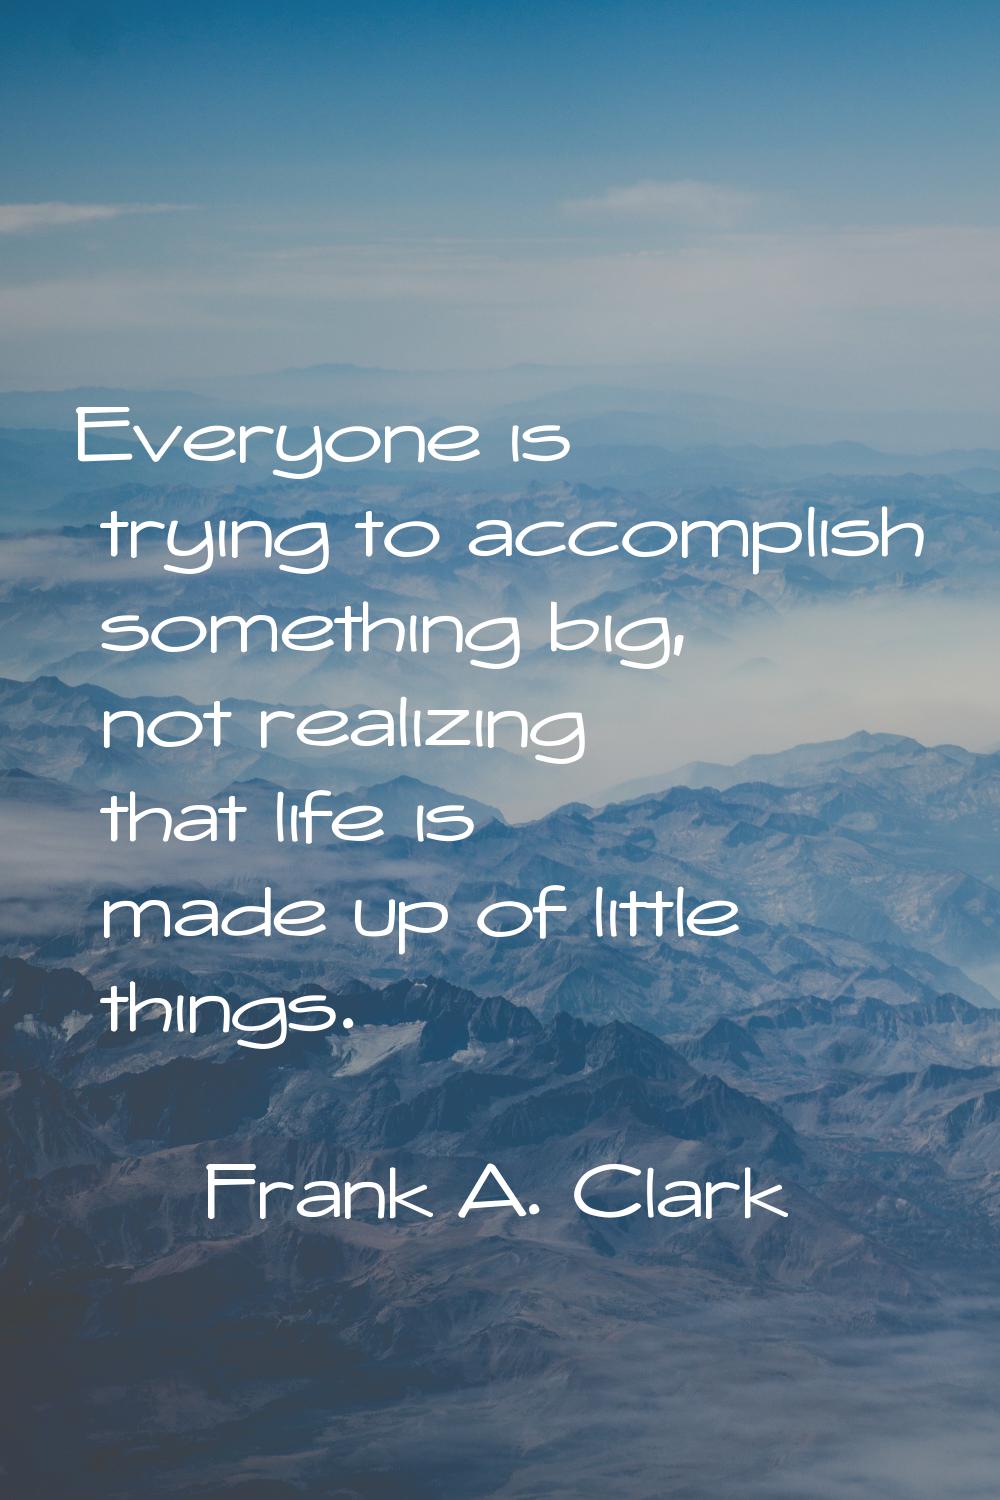 Everyone is trying to accomplish something big, not realizing that life is made up of little things